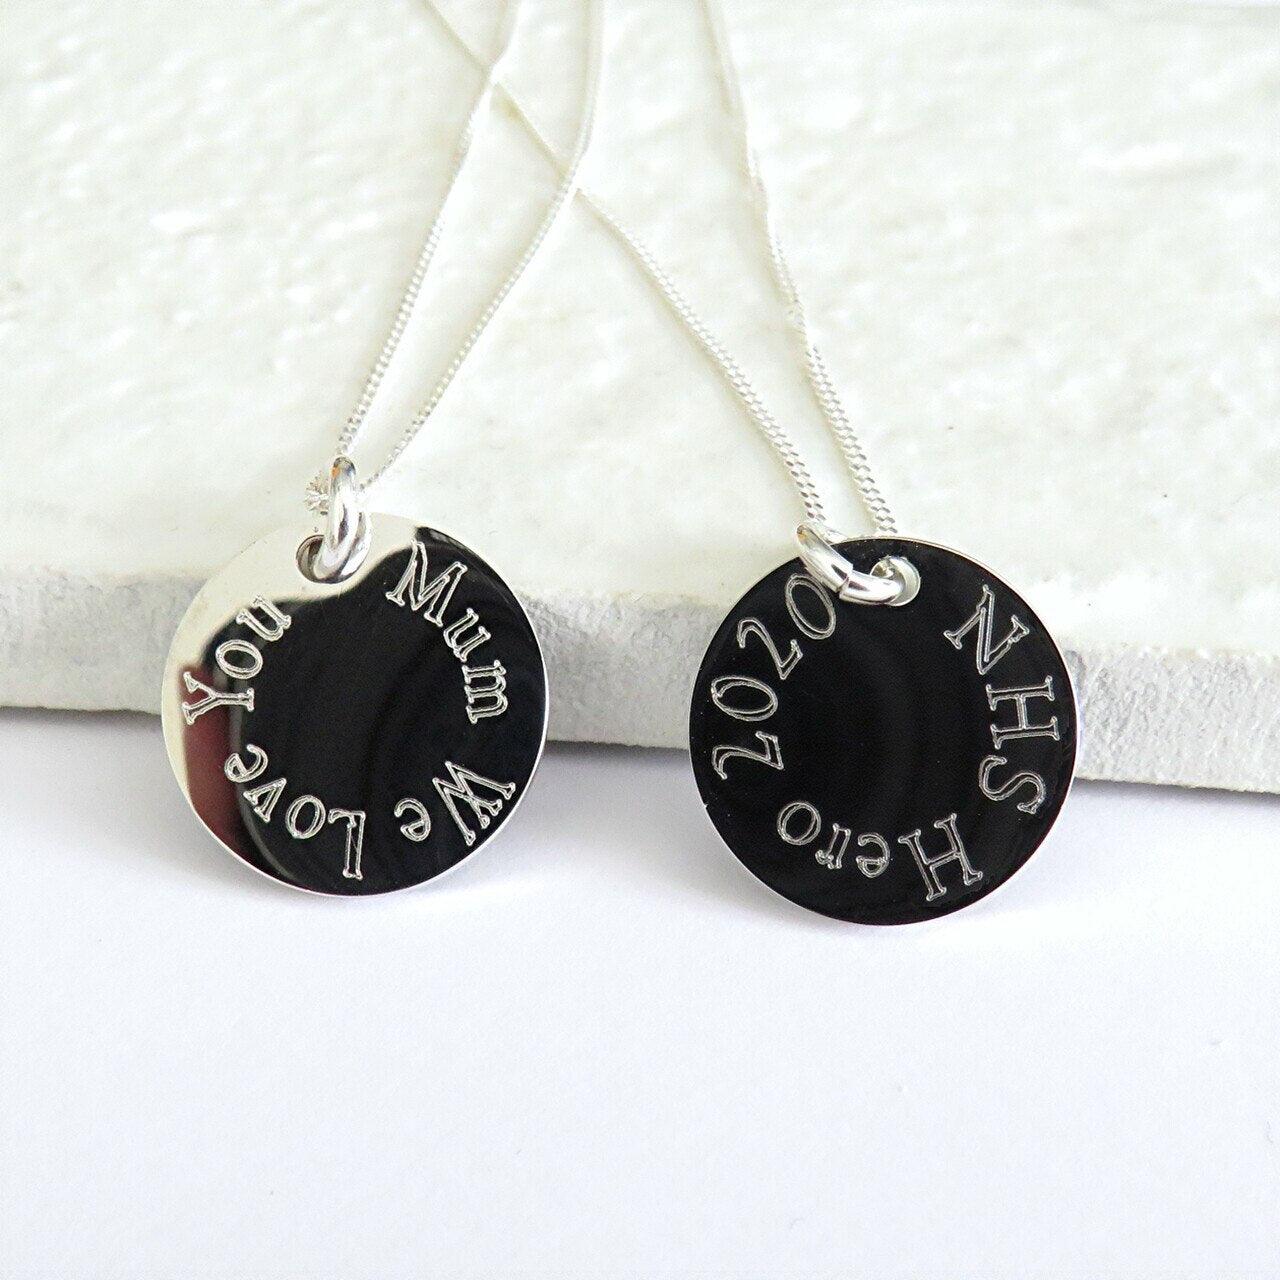 Personalised Engraved Edge Sterling Silver Necklace - Shop Personalised Gifts